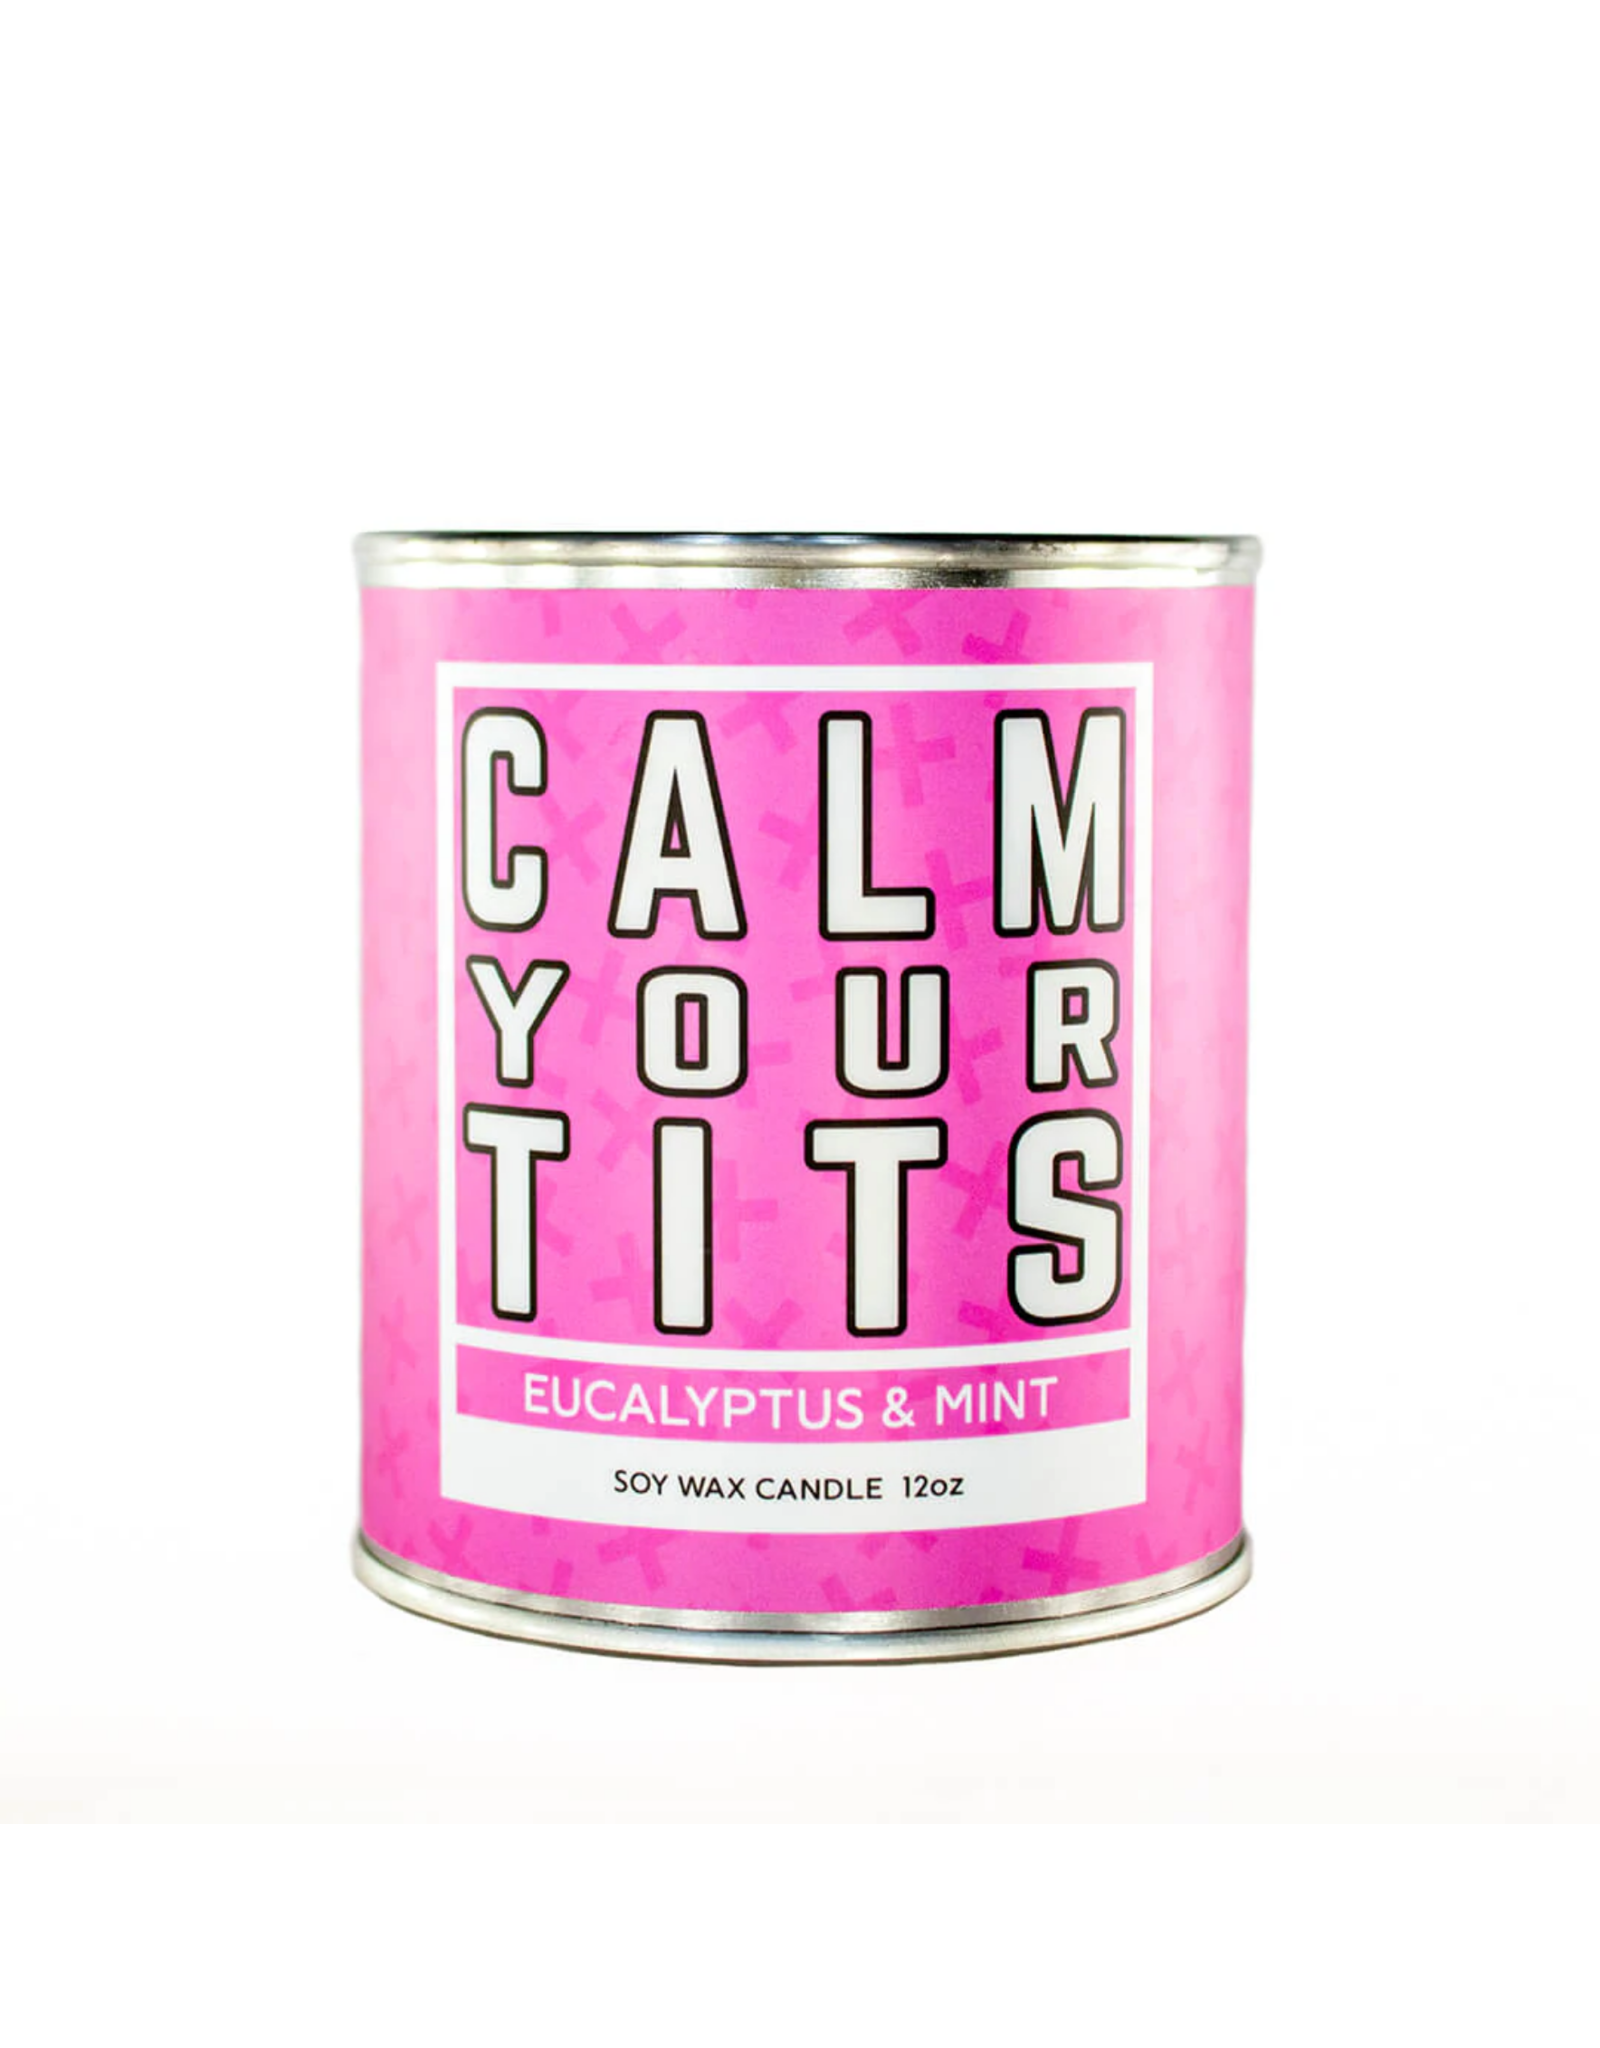 Twisted Wares Tits Candle